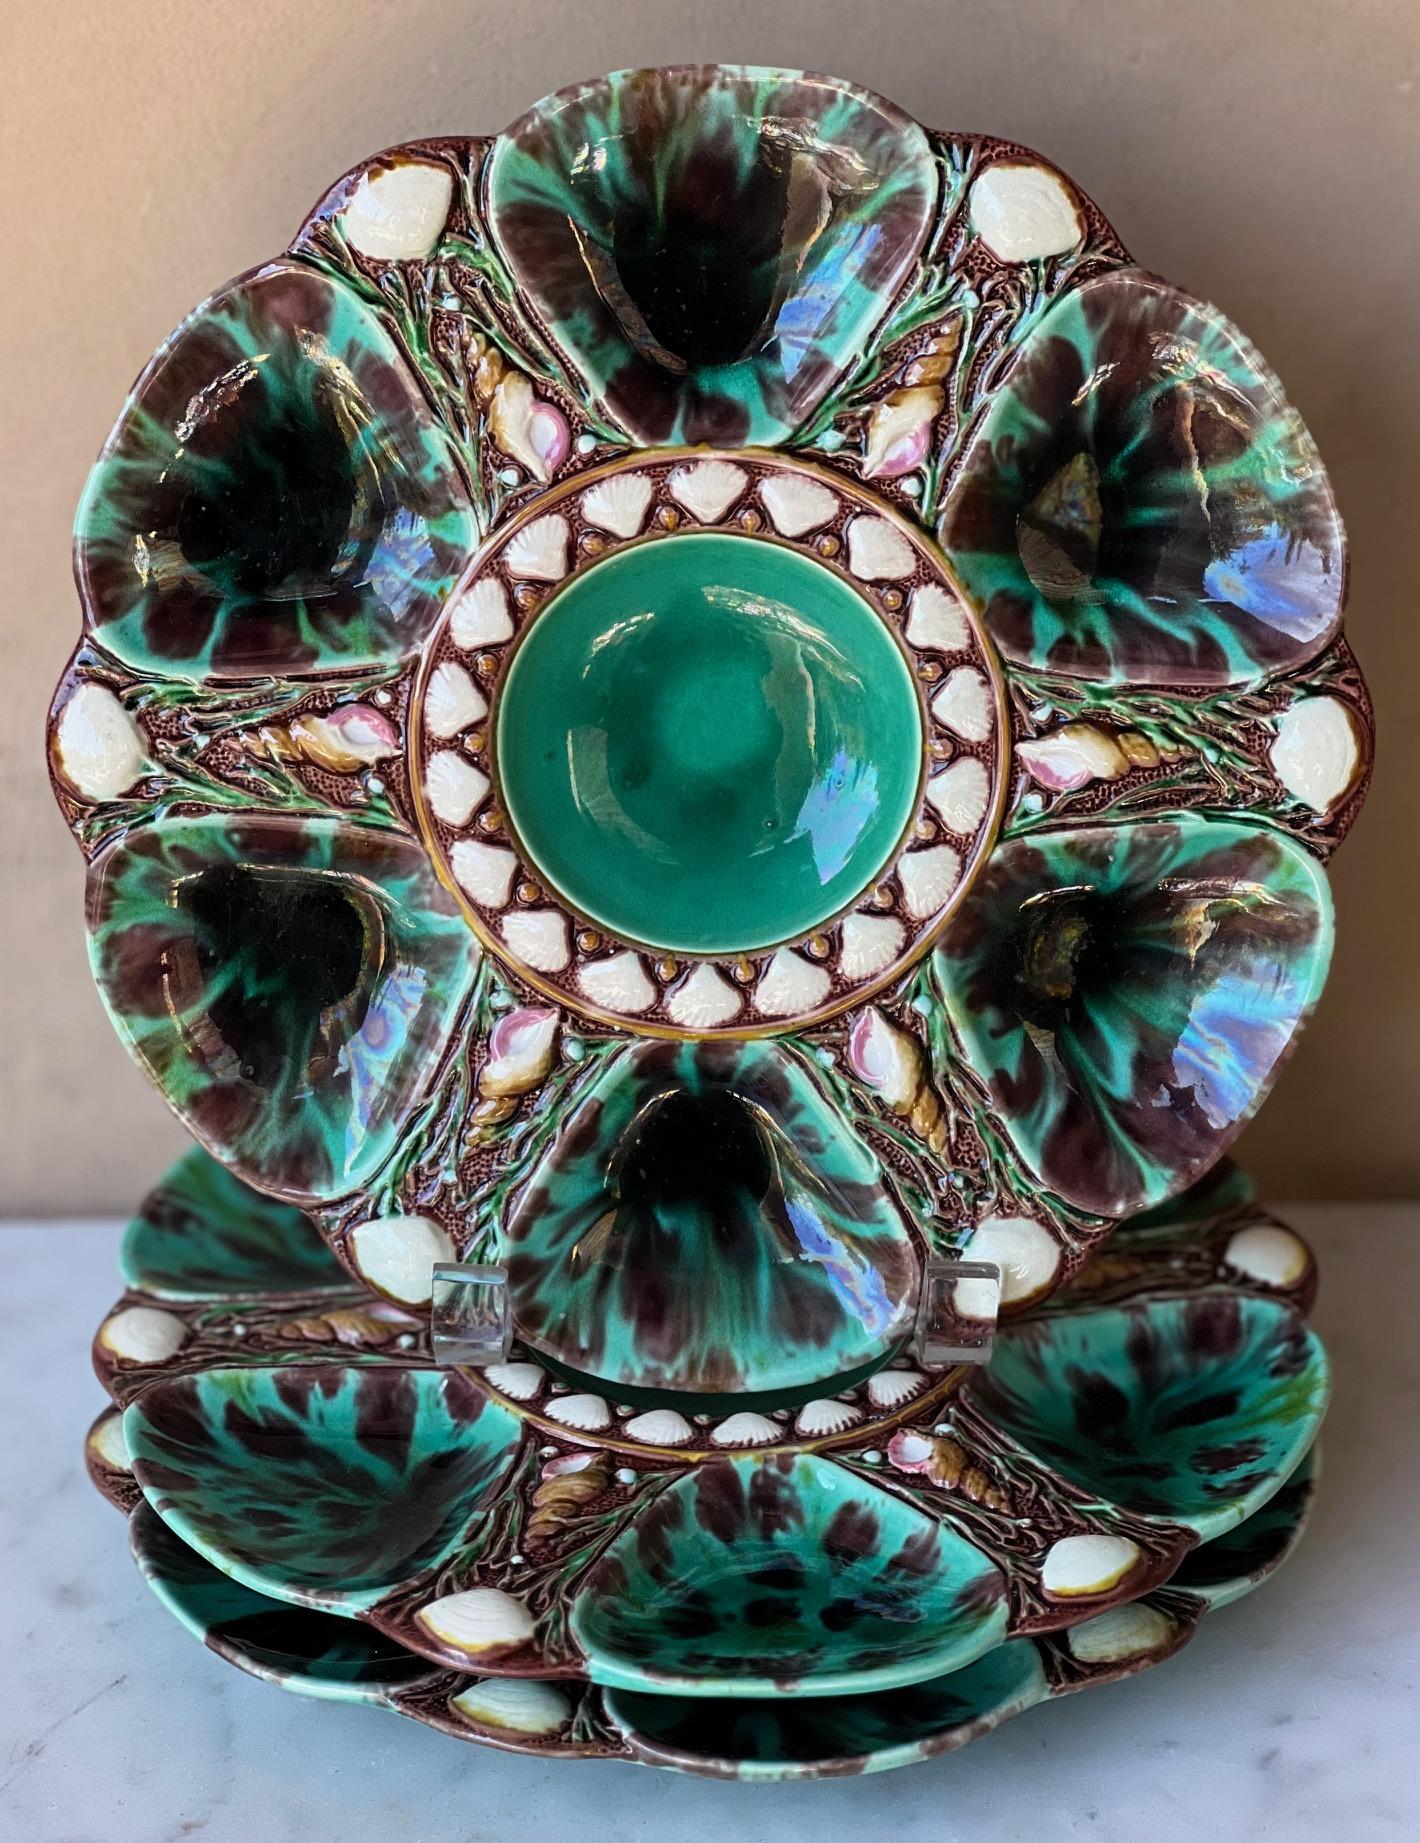 English Antique Minton Green Majolica Oyster Plate, circa 1860's-1870's For Sale